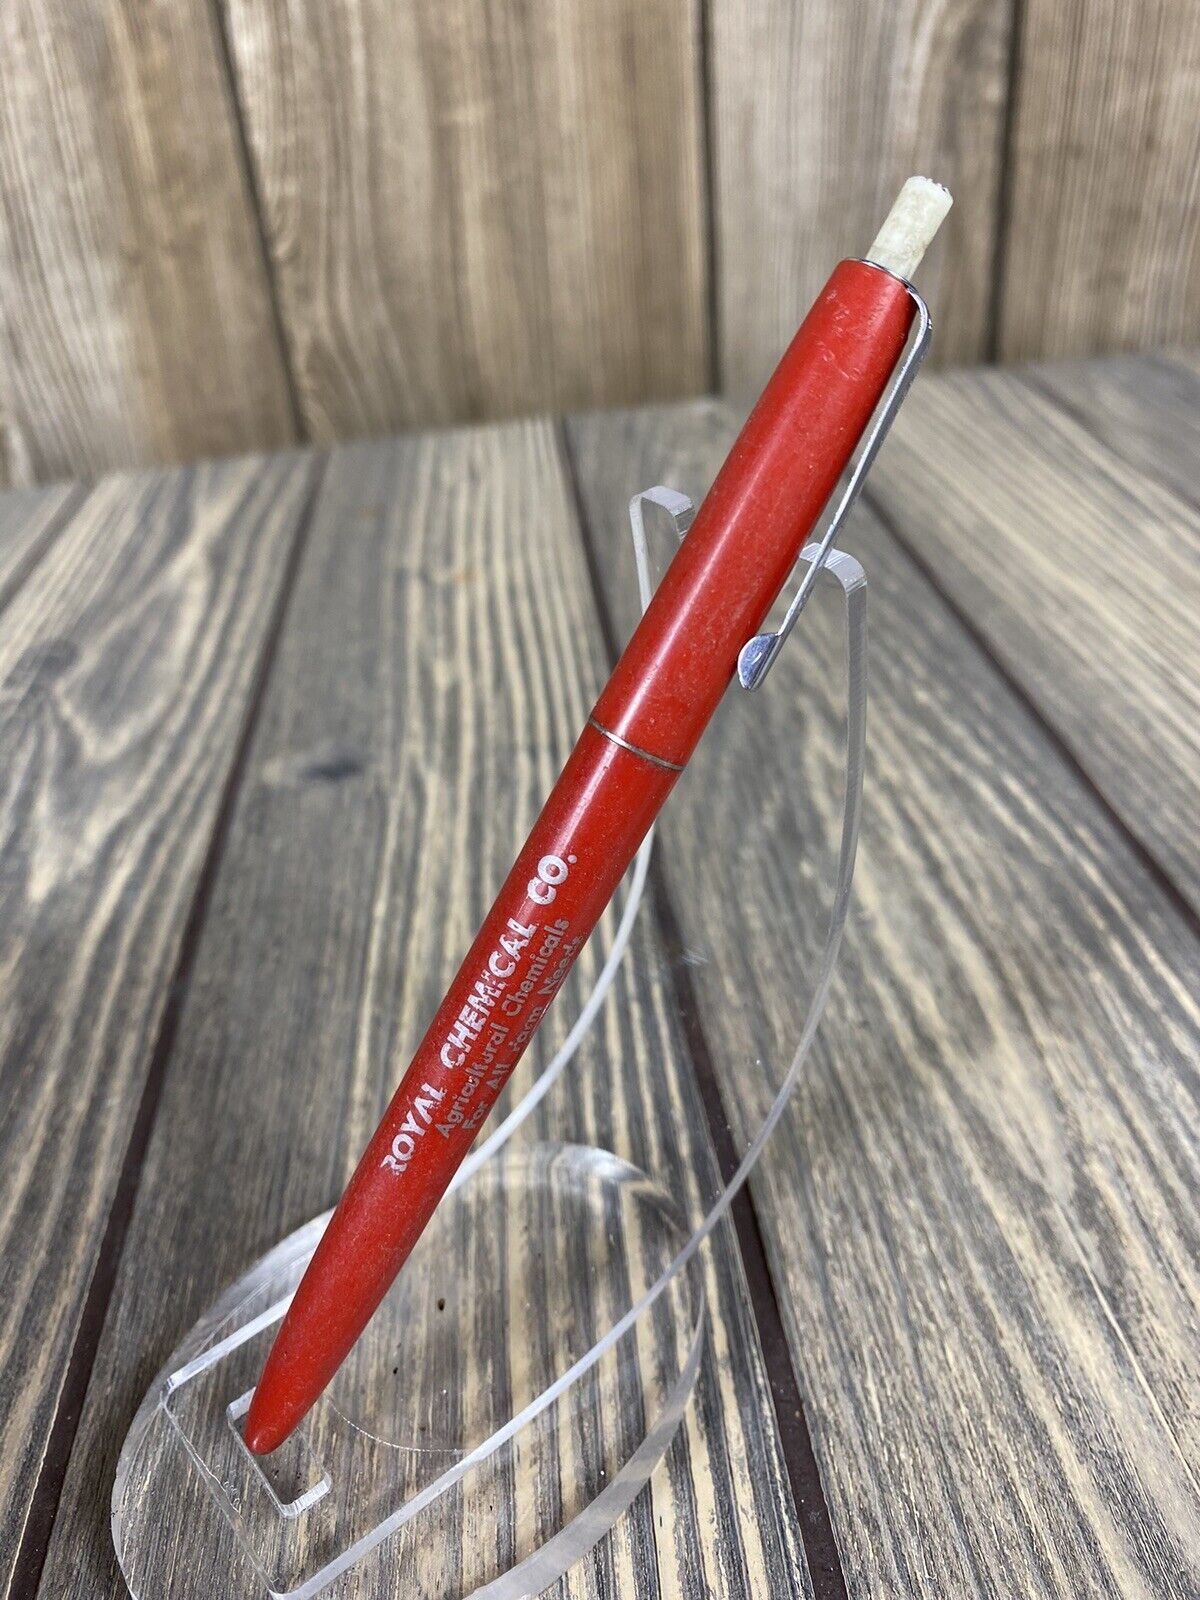 Vintage Royal Chemical Co Redipen Red Pen Advertisement